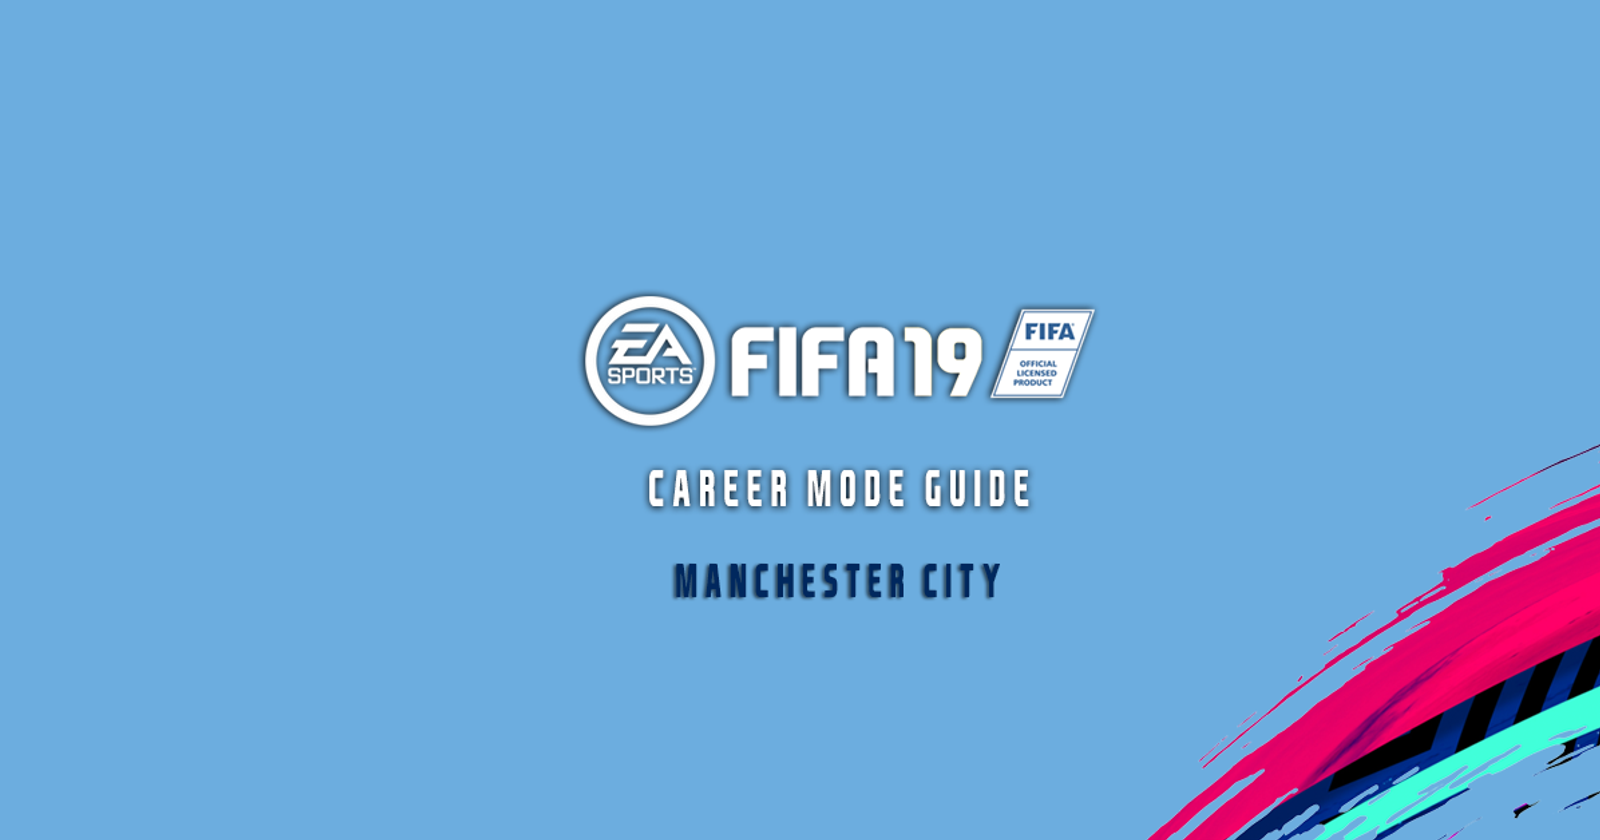 FIFA 19 Web App Troubleshooting Guide for the Most Common Issues